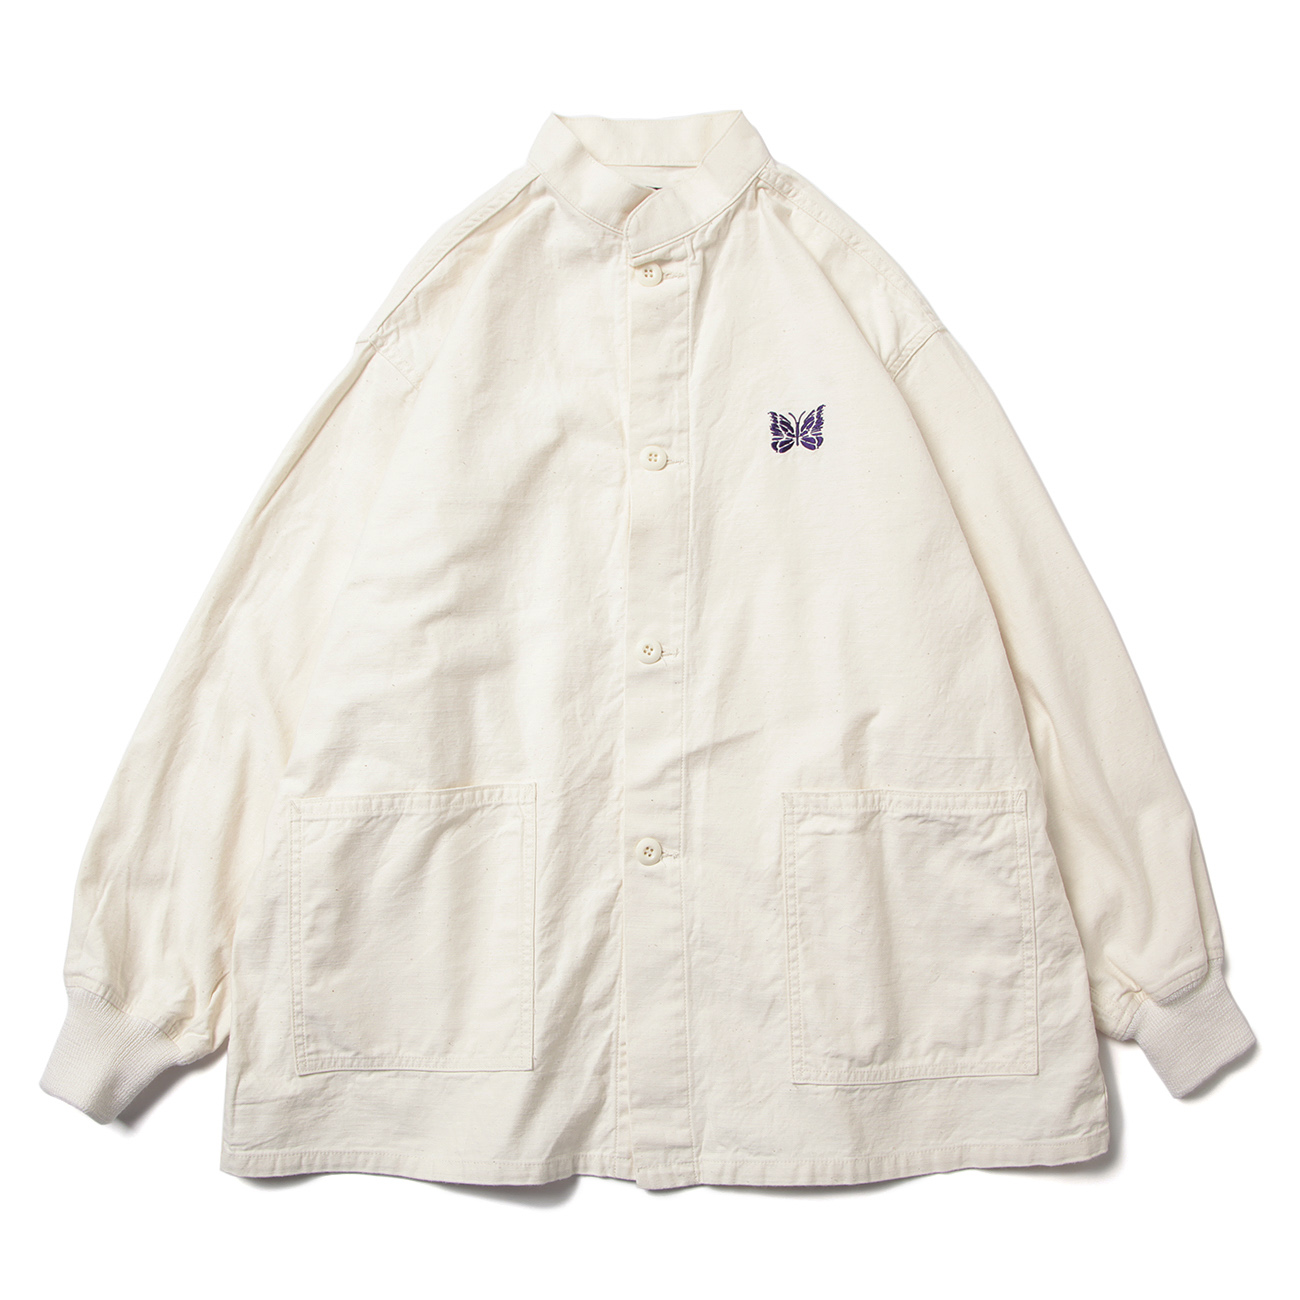 S.C. Army Shirt - Back Sateen - White